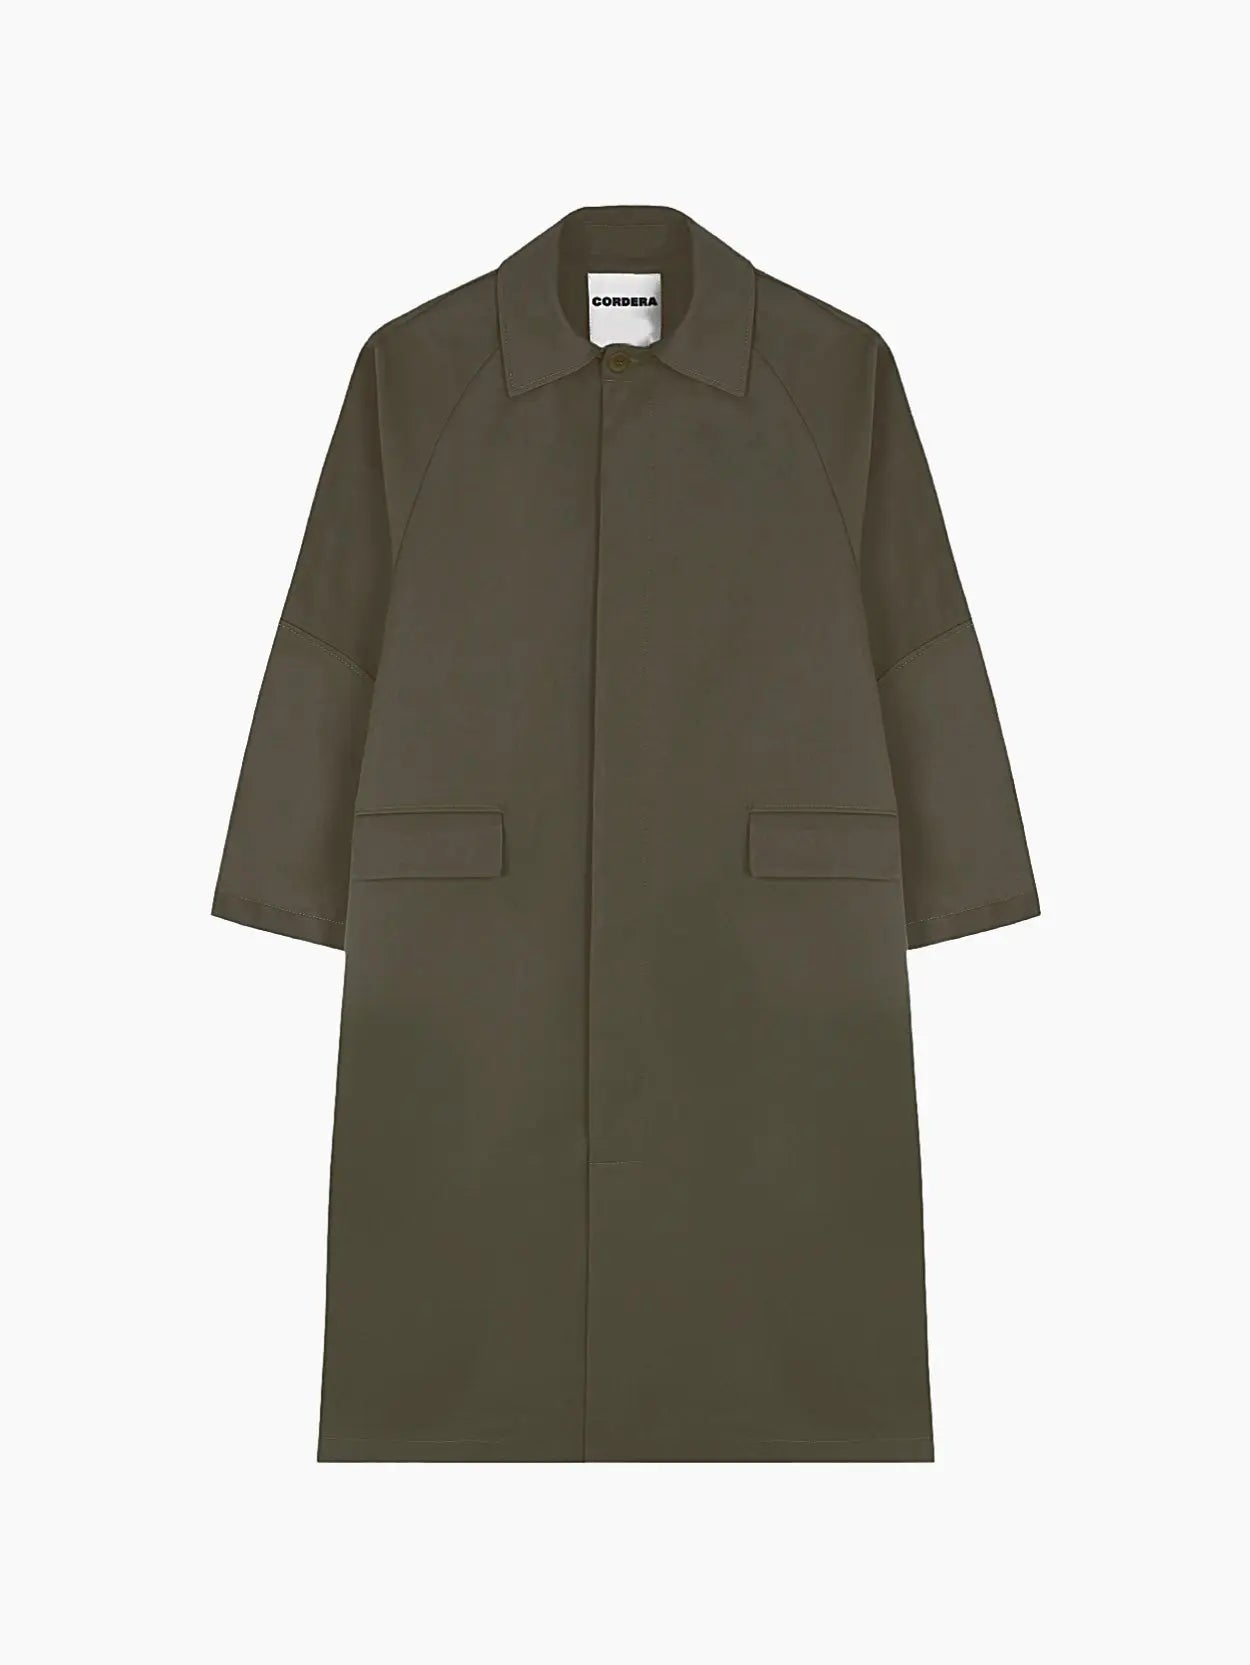 A knee-length, dark green trench coat featuring large front pockets, long sleeves, and a pointed collar. The minimalist design includes a concealed button closure and a plain back, creating a sleek and timeless look. Available at the Barcelona-based store "Bassalstore," the label "Cordera" is visible inside the collar.